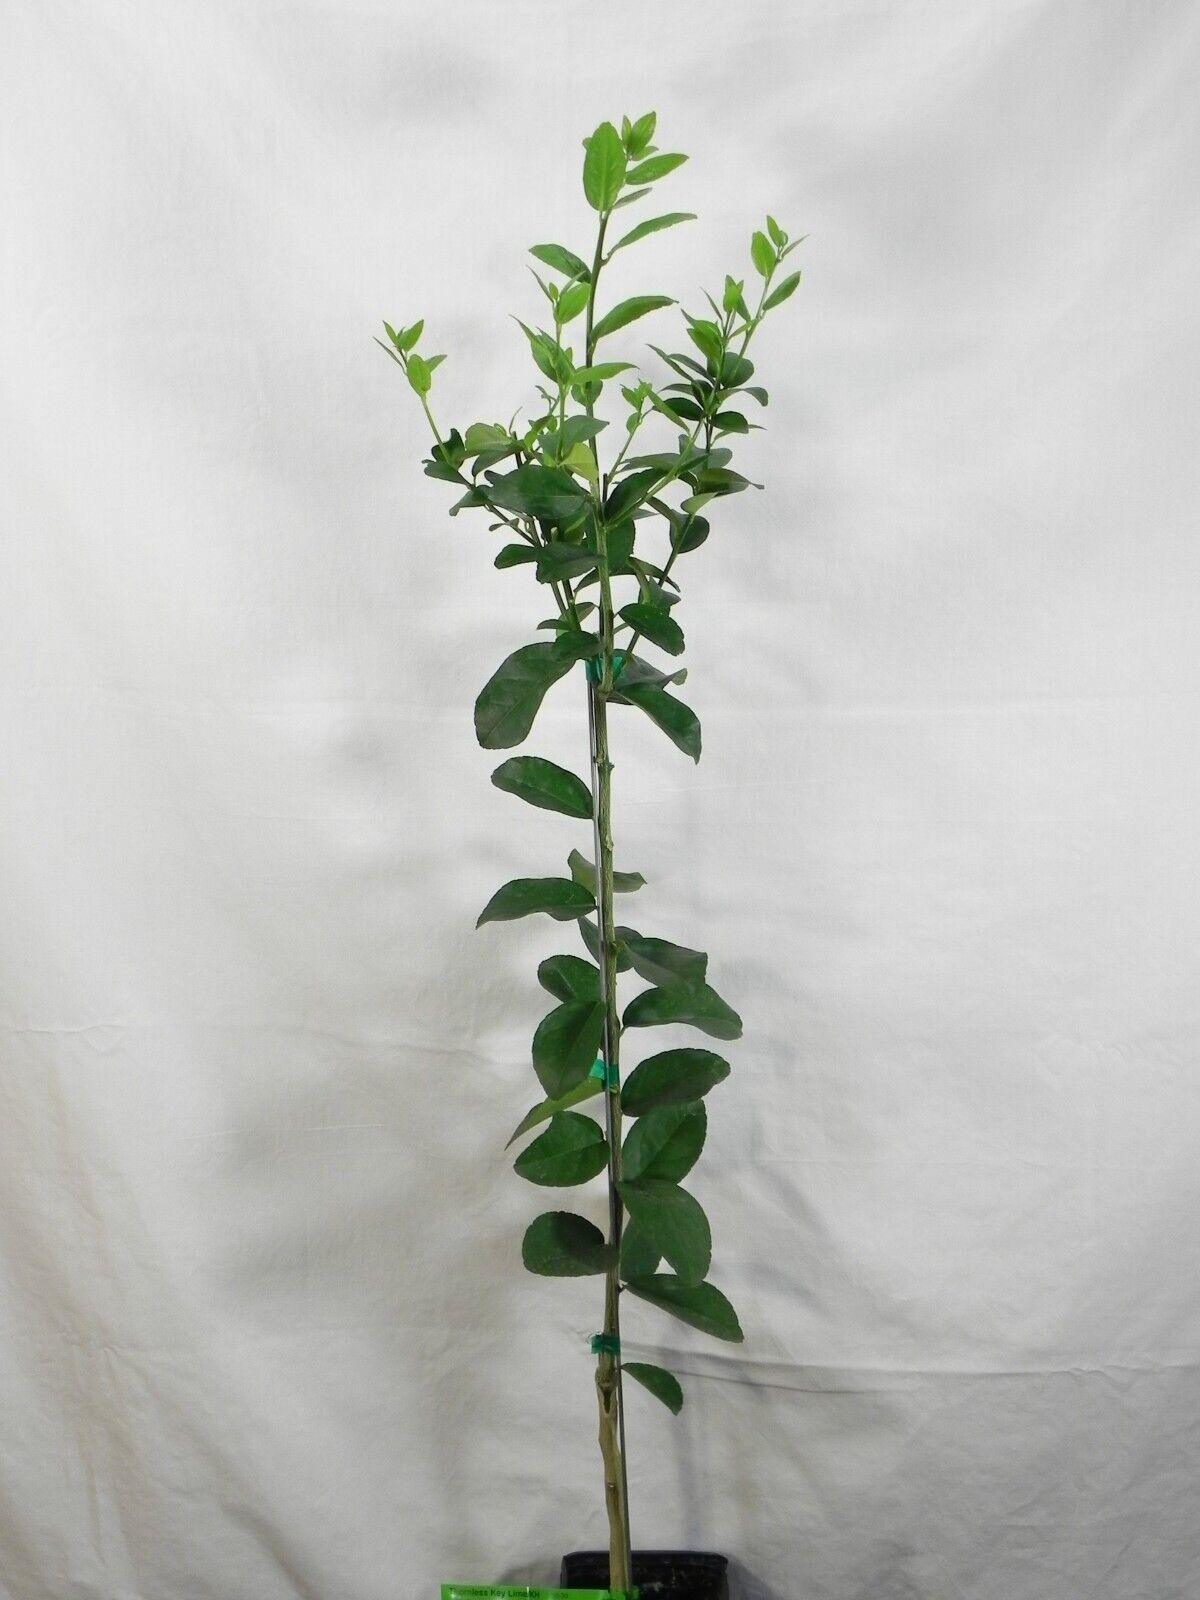 Thornless Mexican Key Lime Tree - 26-30" Tall - Live Citrus Plant - Gallon Pot - The Nursery Center